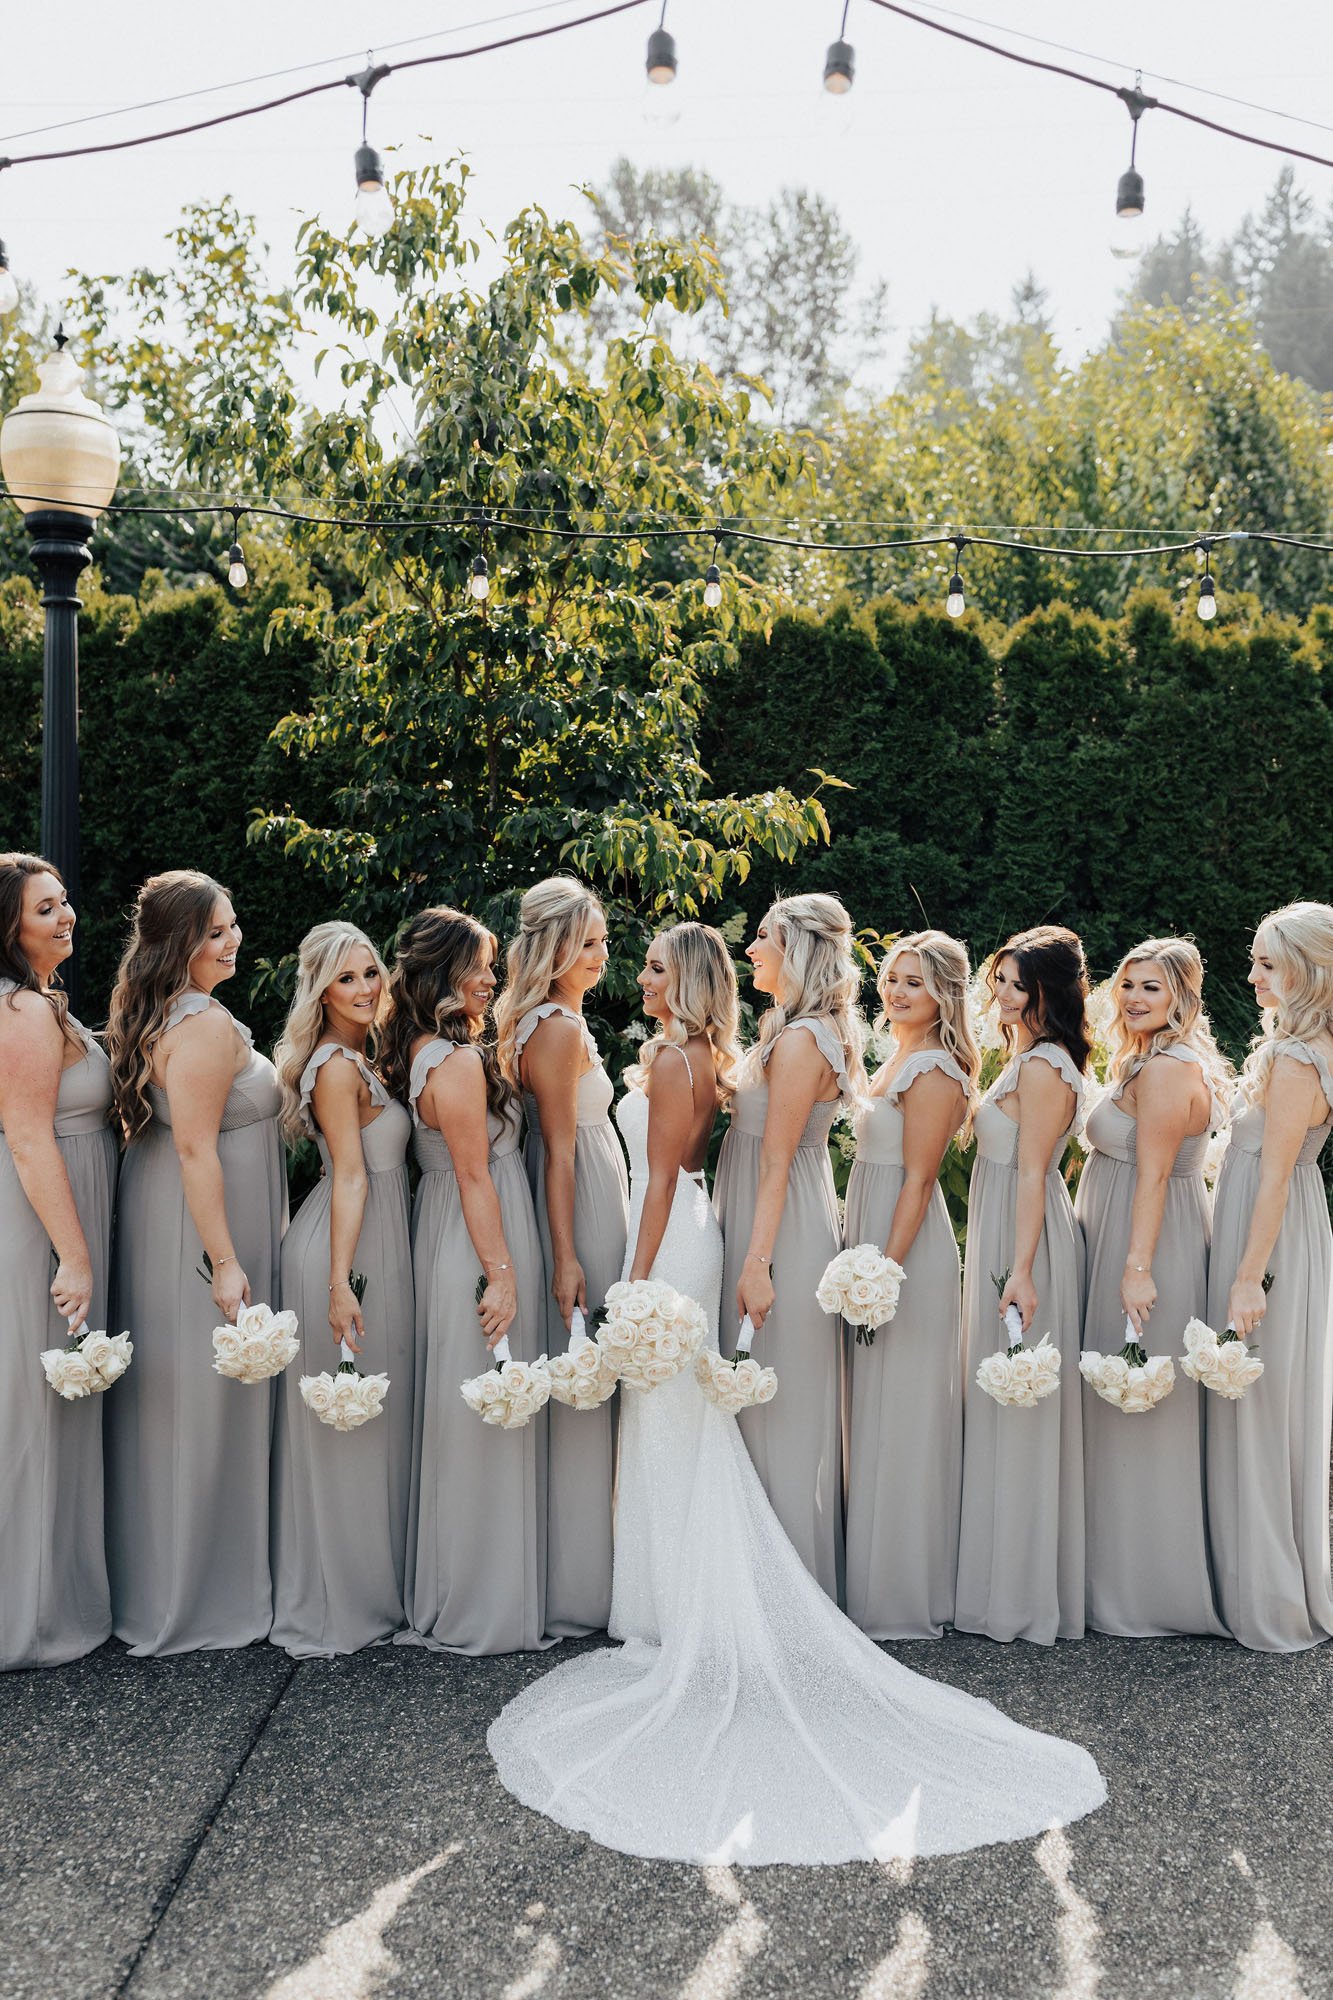  Photograph of a bridal party with ten bridesmaids. The bride is standing in the center of the group wearing the Made With Love Lola wedding dress, which has a low back and is covered in sequins. The bridesmaids are wearing grey chiffon floor length 